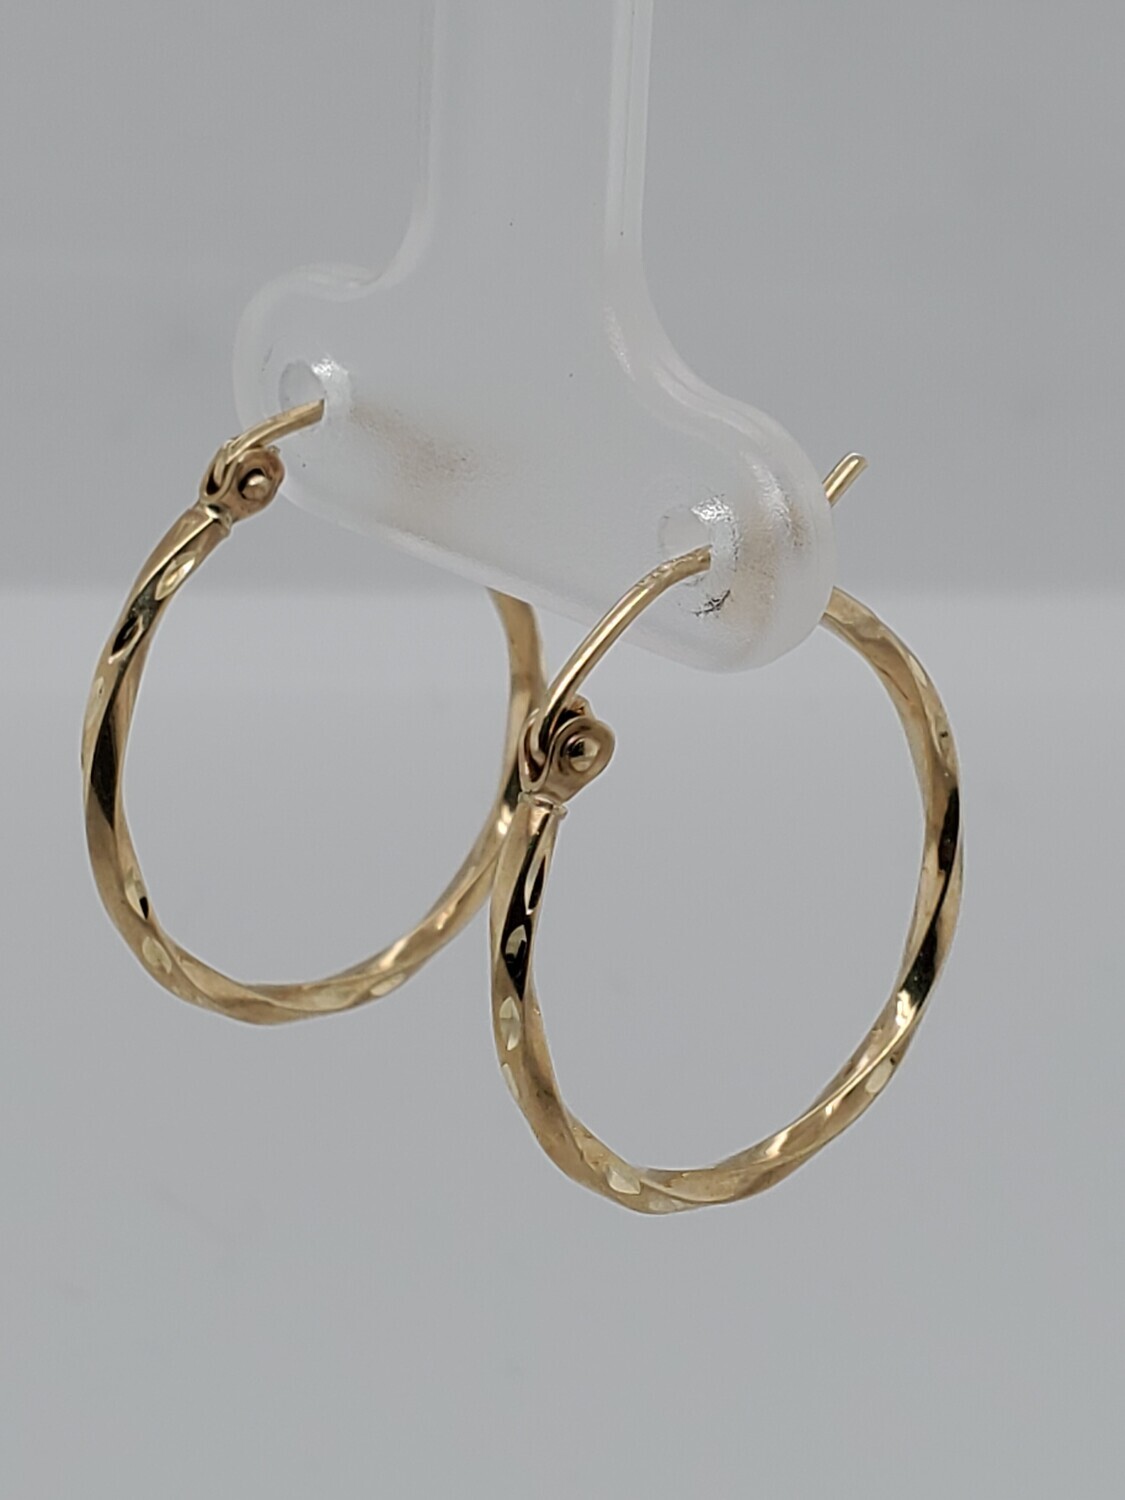 BRAND NEW!! 10KT SMALL TWISTED HOOP EARRINGS  INVENTORY # I-18341 75TH AVE